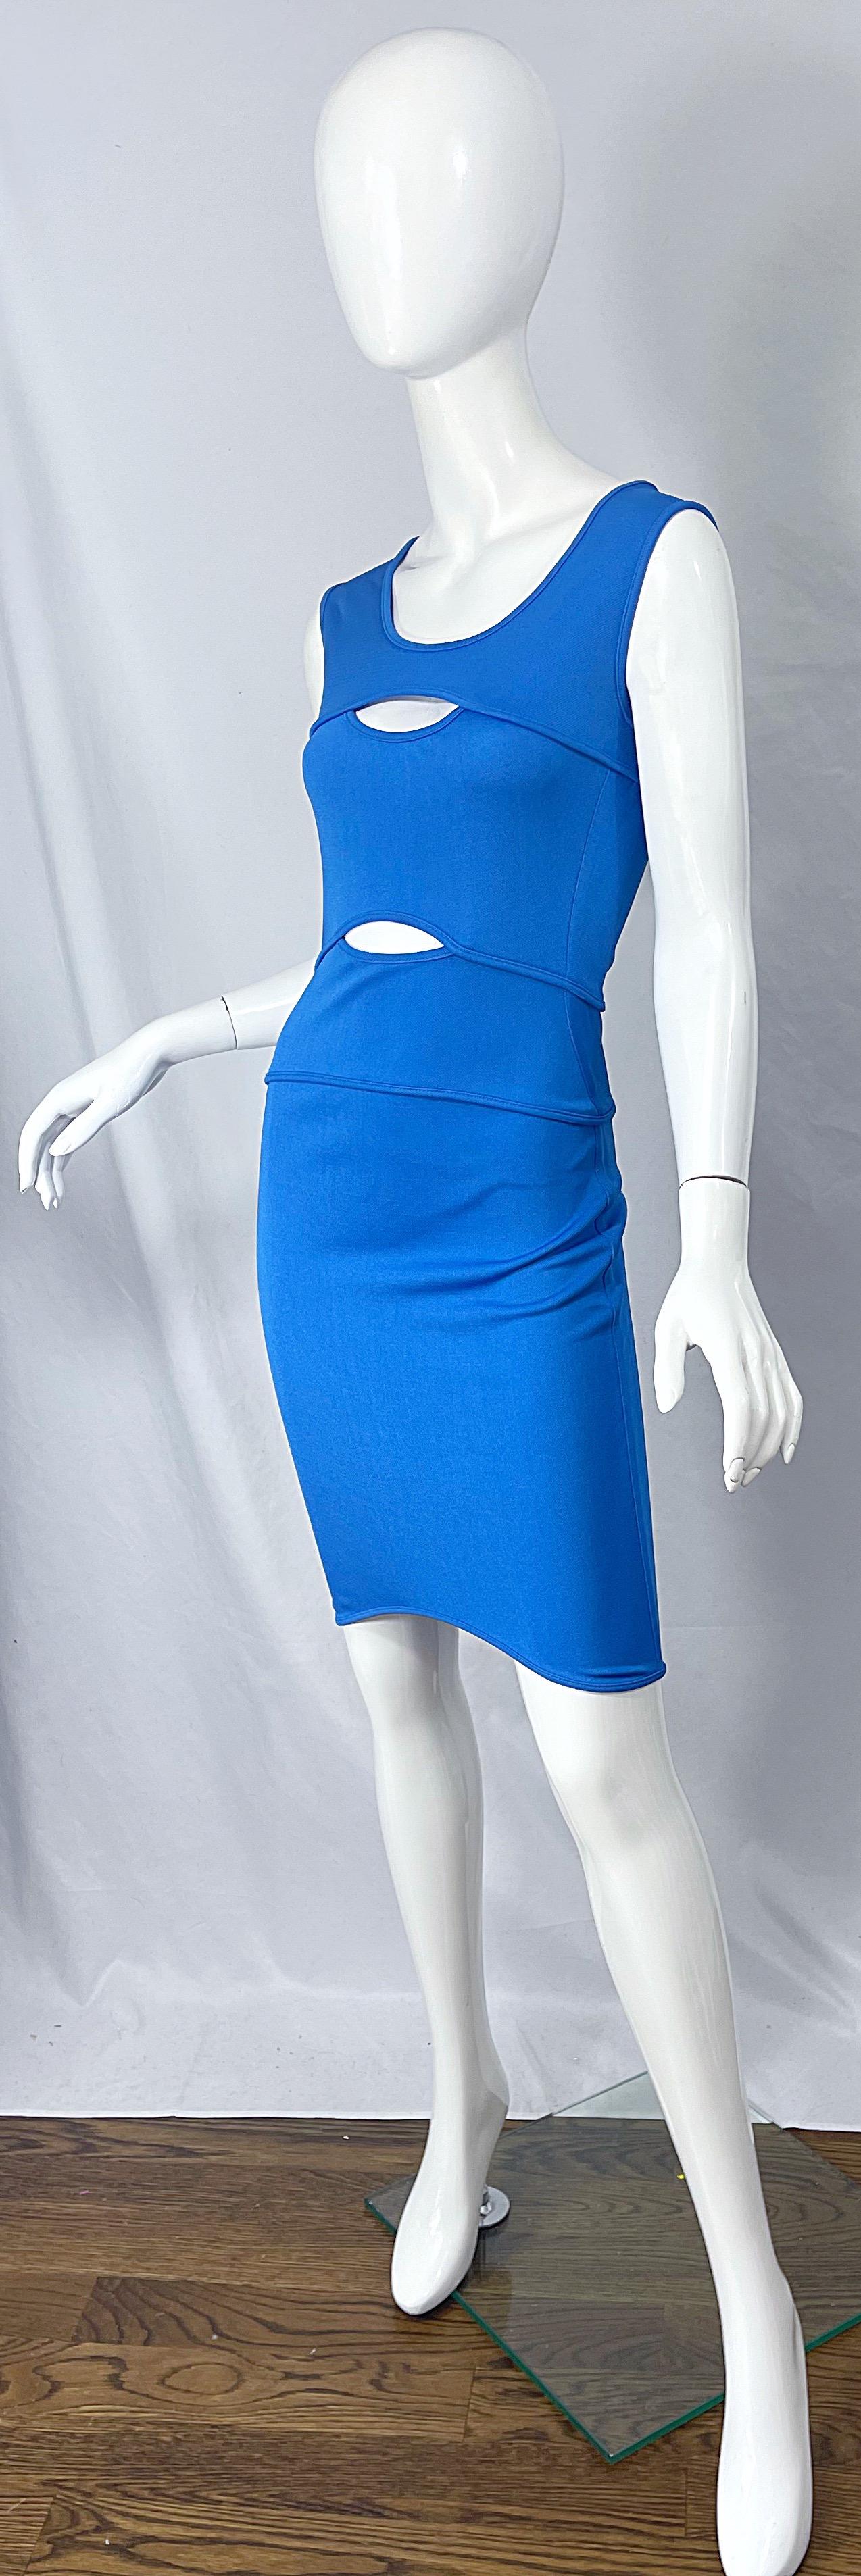 Thierry Mugler 1980s Blue Cut Out Vintage Body Con 80s Dress Size 44 In Excellent Condition For Sale In San Diego, CA